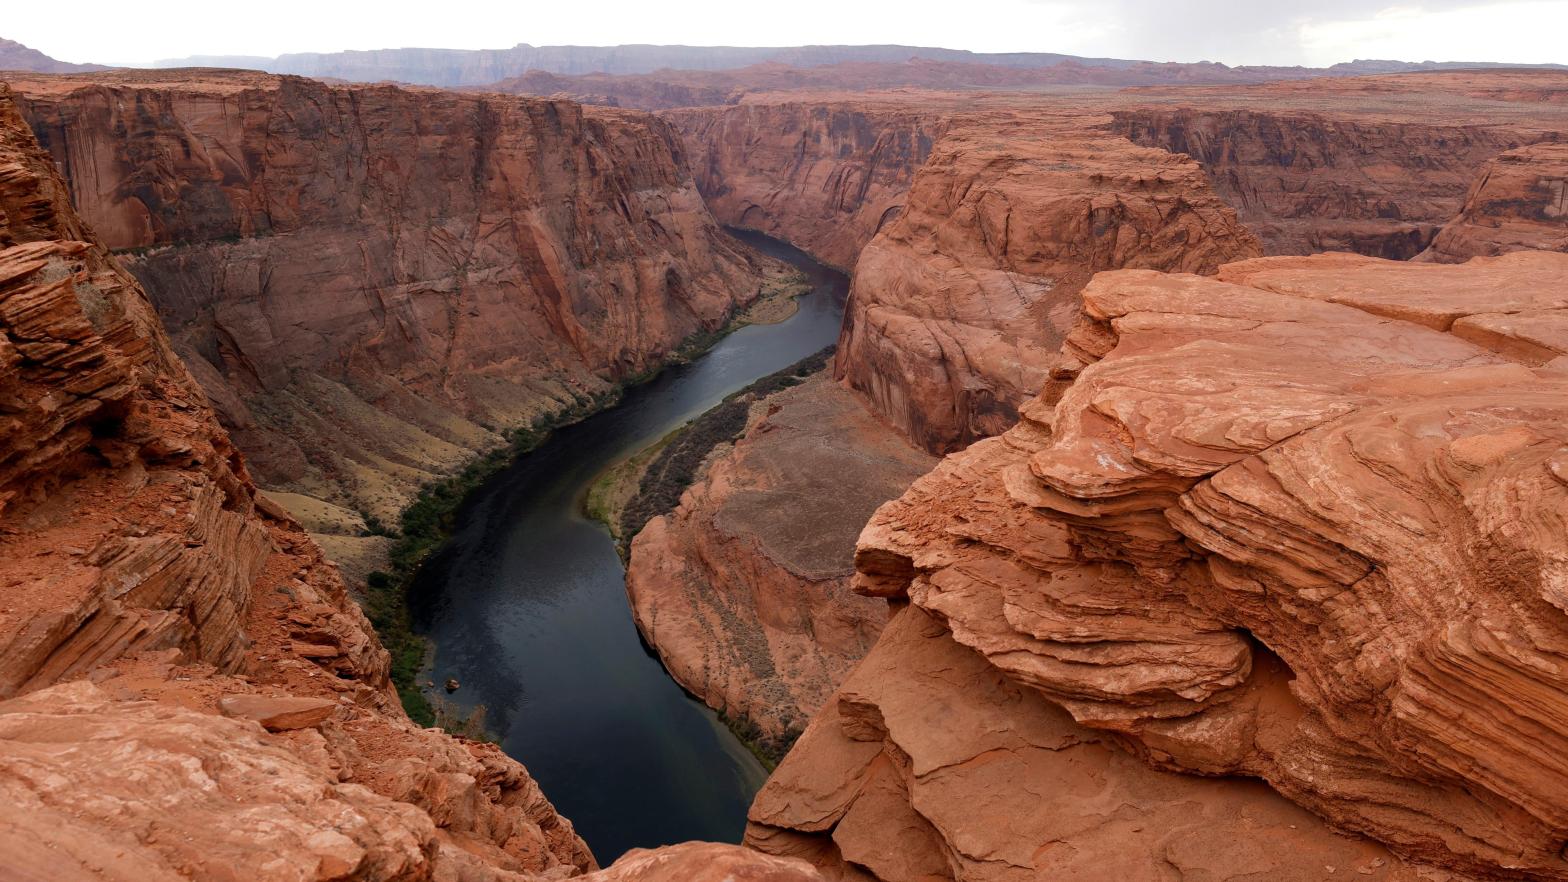 A view of the Colorado River as it flows around Horseshoe Bend on June 23, 2021 in Page, Arizona. (Photo: Justin Sullivan, Getty Images)